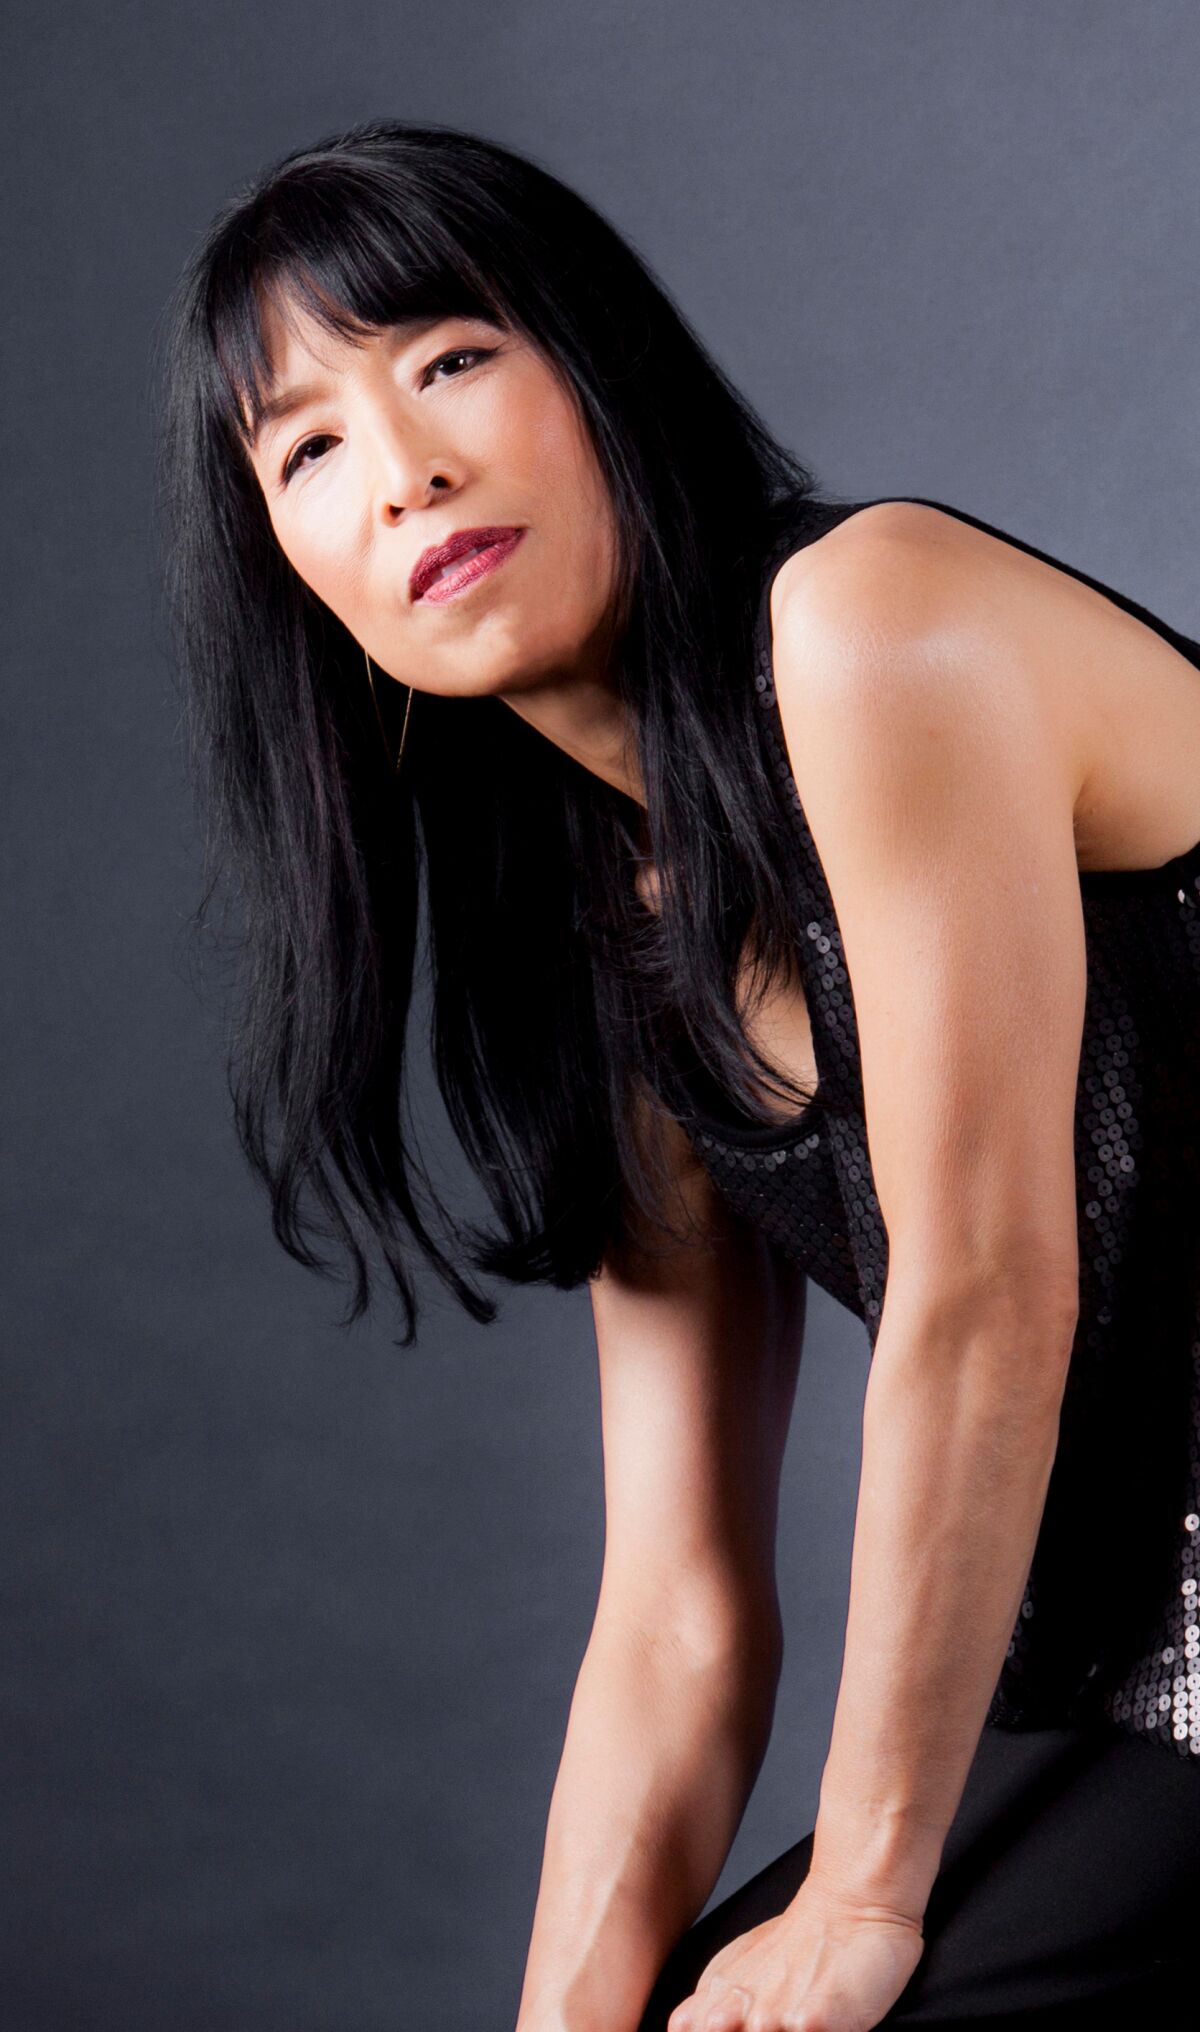 Pianist Gloria Cheng will play a chamber concert livestreamed from the Athenaeum Music & Arts Library Music Room on Feb. 15.